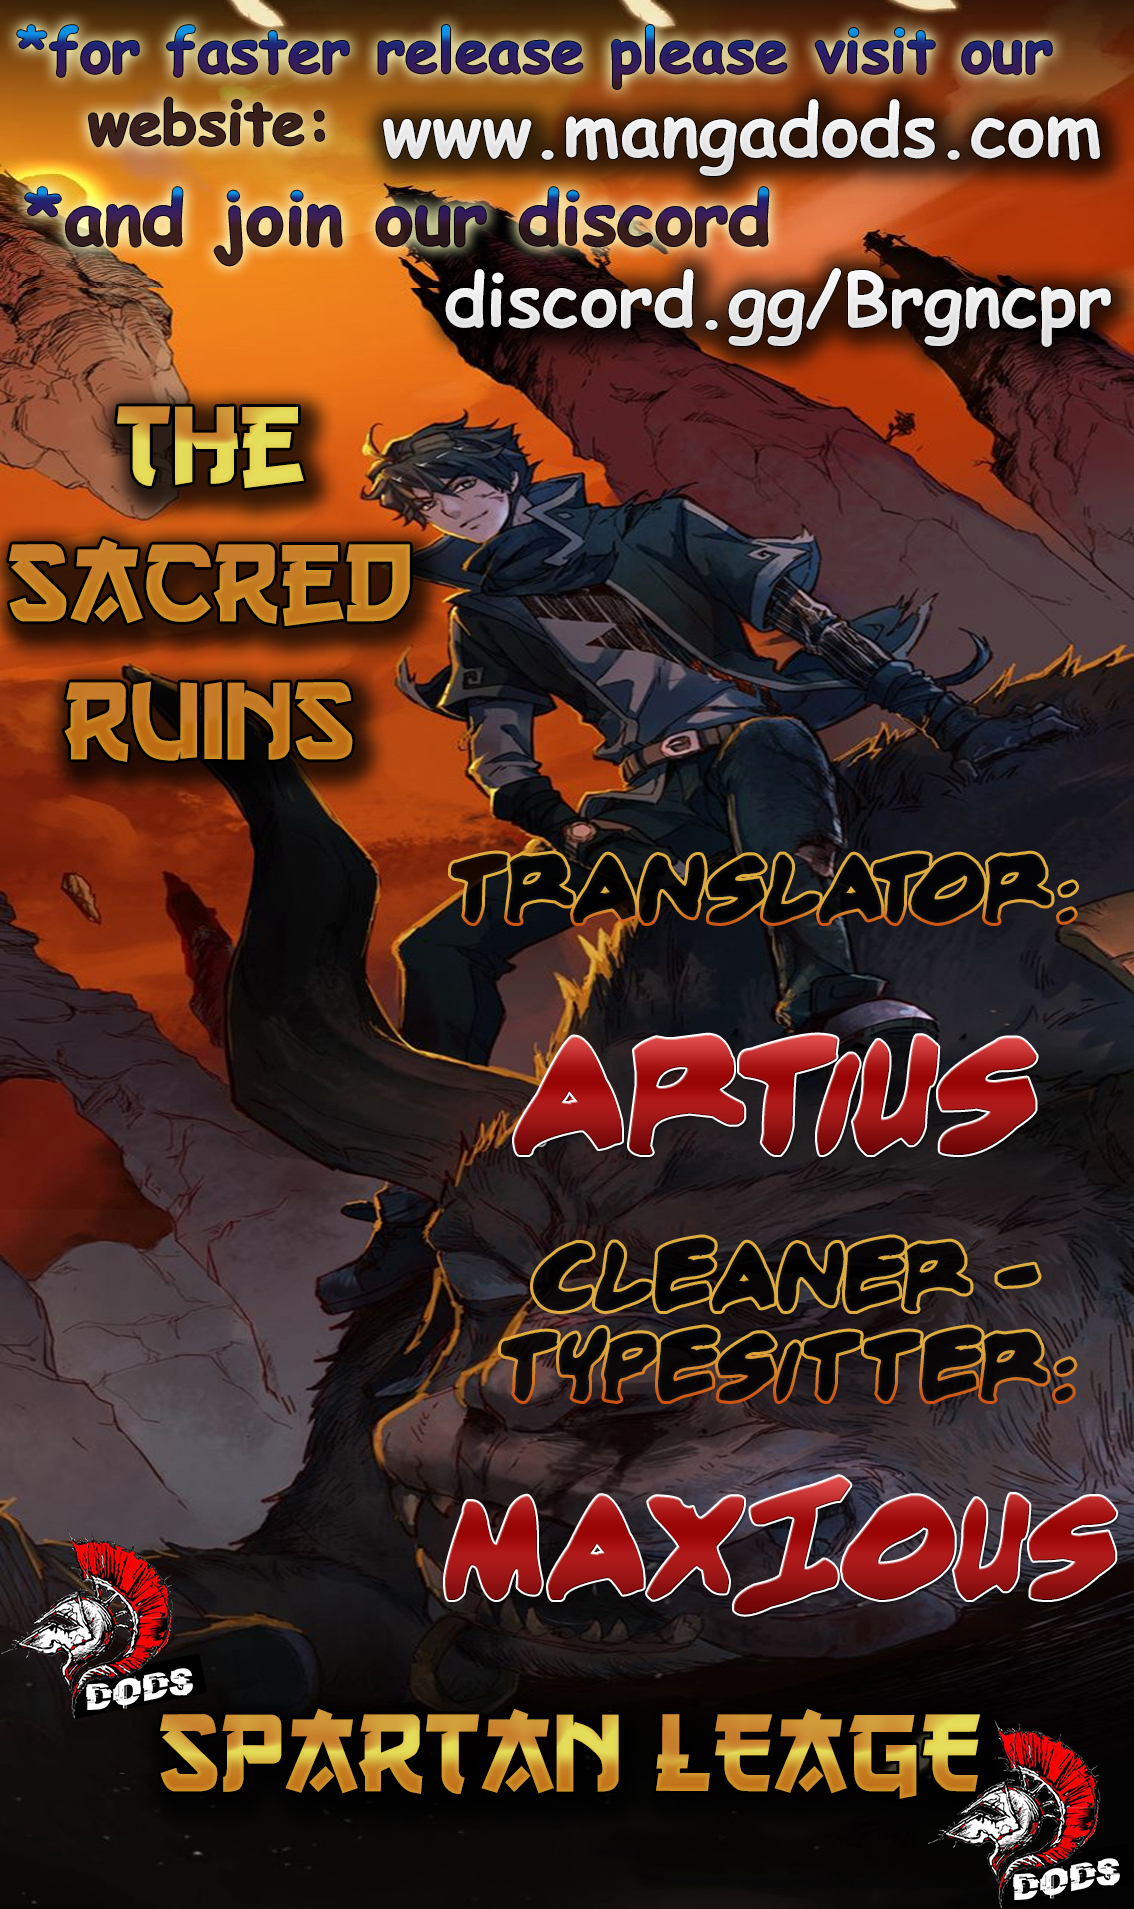 The Sacred Ruins ch.2